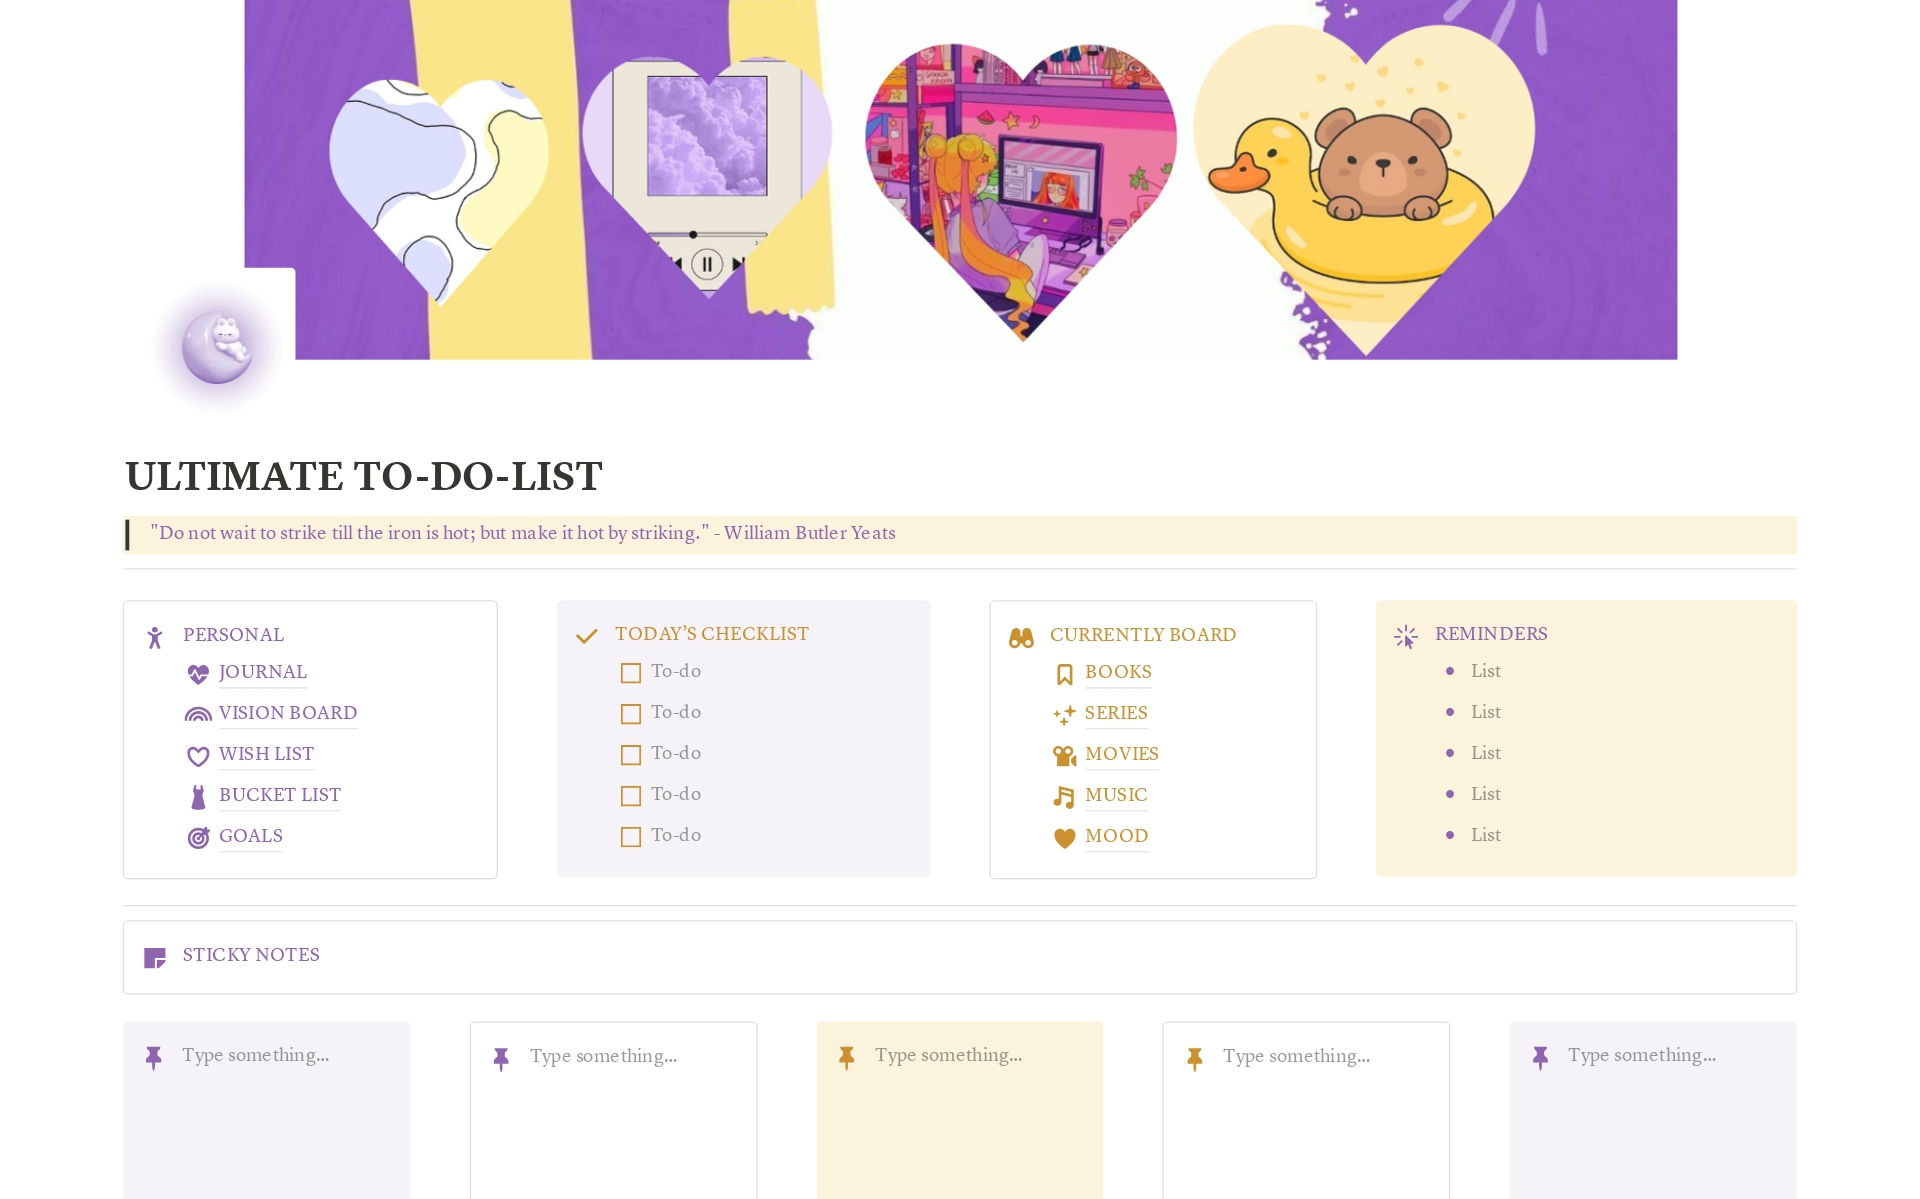 Introducing the LINA'S ULTIMATE TO-DO-LIST TEMPLATE - Your Ultimate Companion For Organizing And Optimizing Your Daily, Weekly & Monthly Journey With Aesthetic Style And Simplicity.